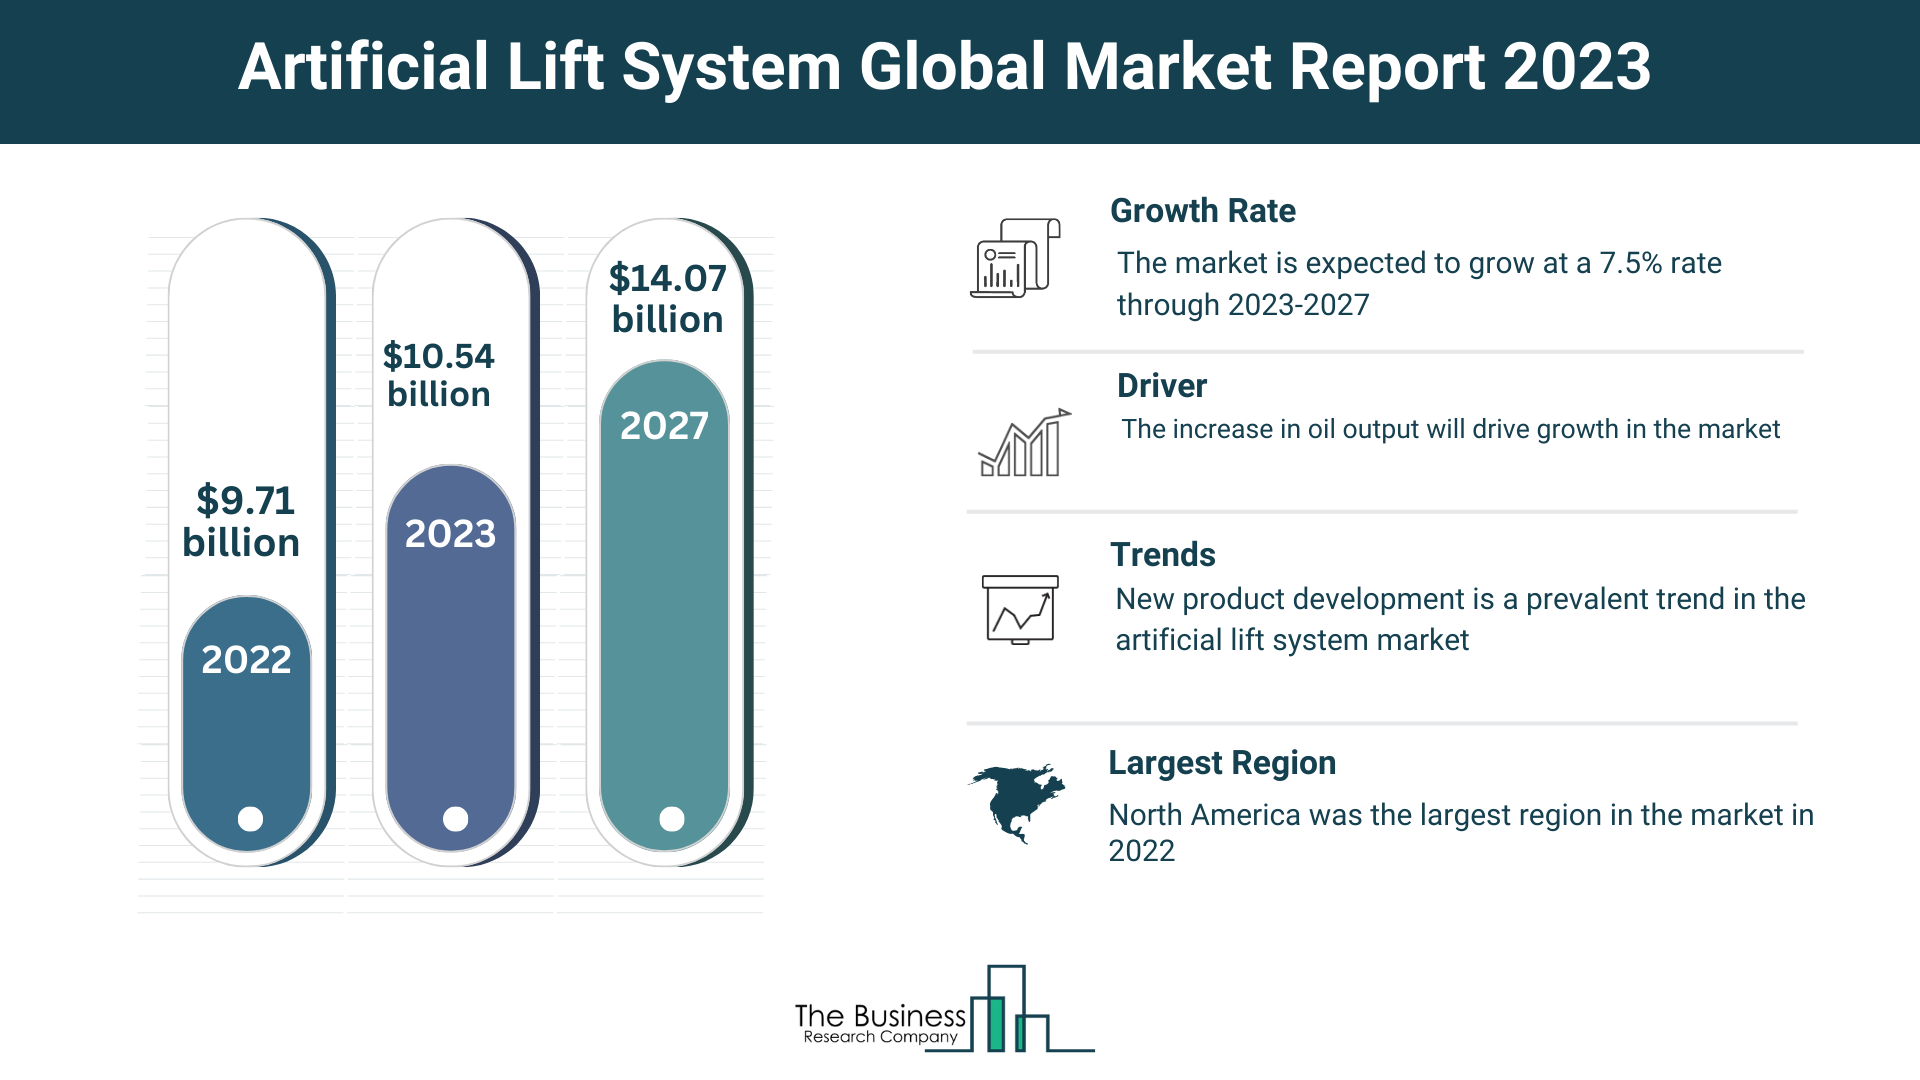 How Will The Artificial Lift System Market Expand Through 2023-2032